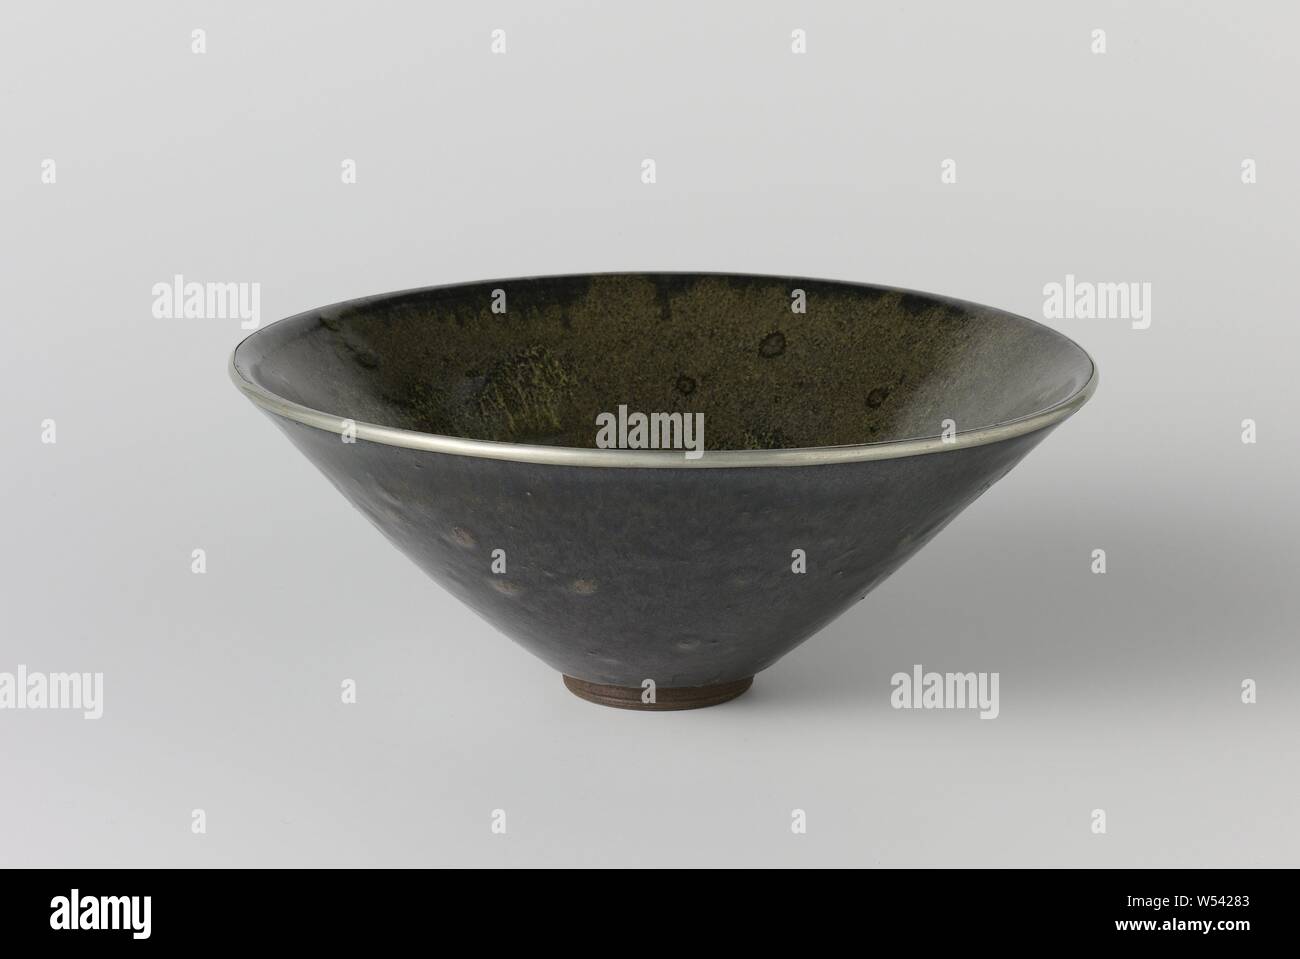 Teabowl with a green black glaze, Stoneware tea bowl, partially covered with a green-black glaze. The edge is enclosed in a metal band. The bottom and the foot ring are unglazed. Imitation of a Chinese temmoku. Seto., anonymous, Japan, c. 1500 - c. 1699, Edo-period (1600-1868), stoneware, glaze, rand, vitrification, h 8.7 cm d 22.2 cm d 4.9 cm Stock Photo